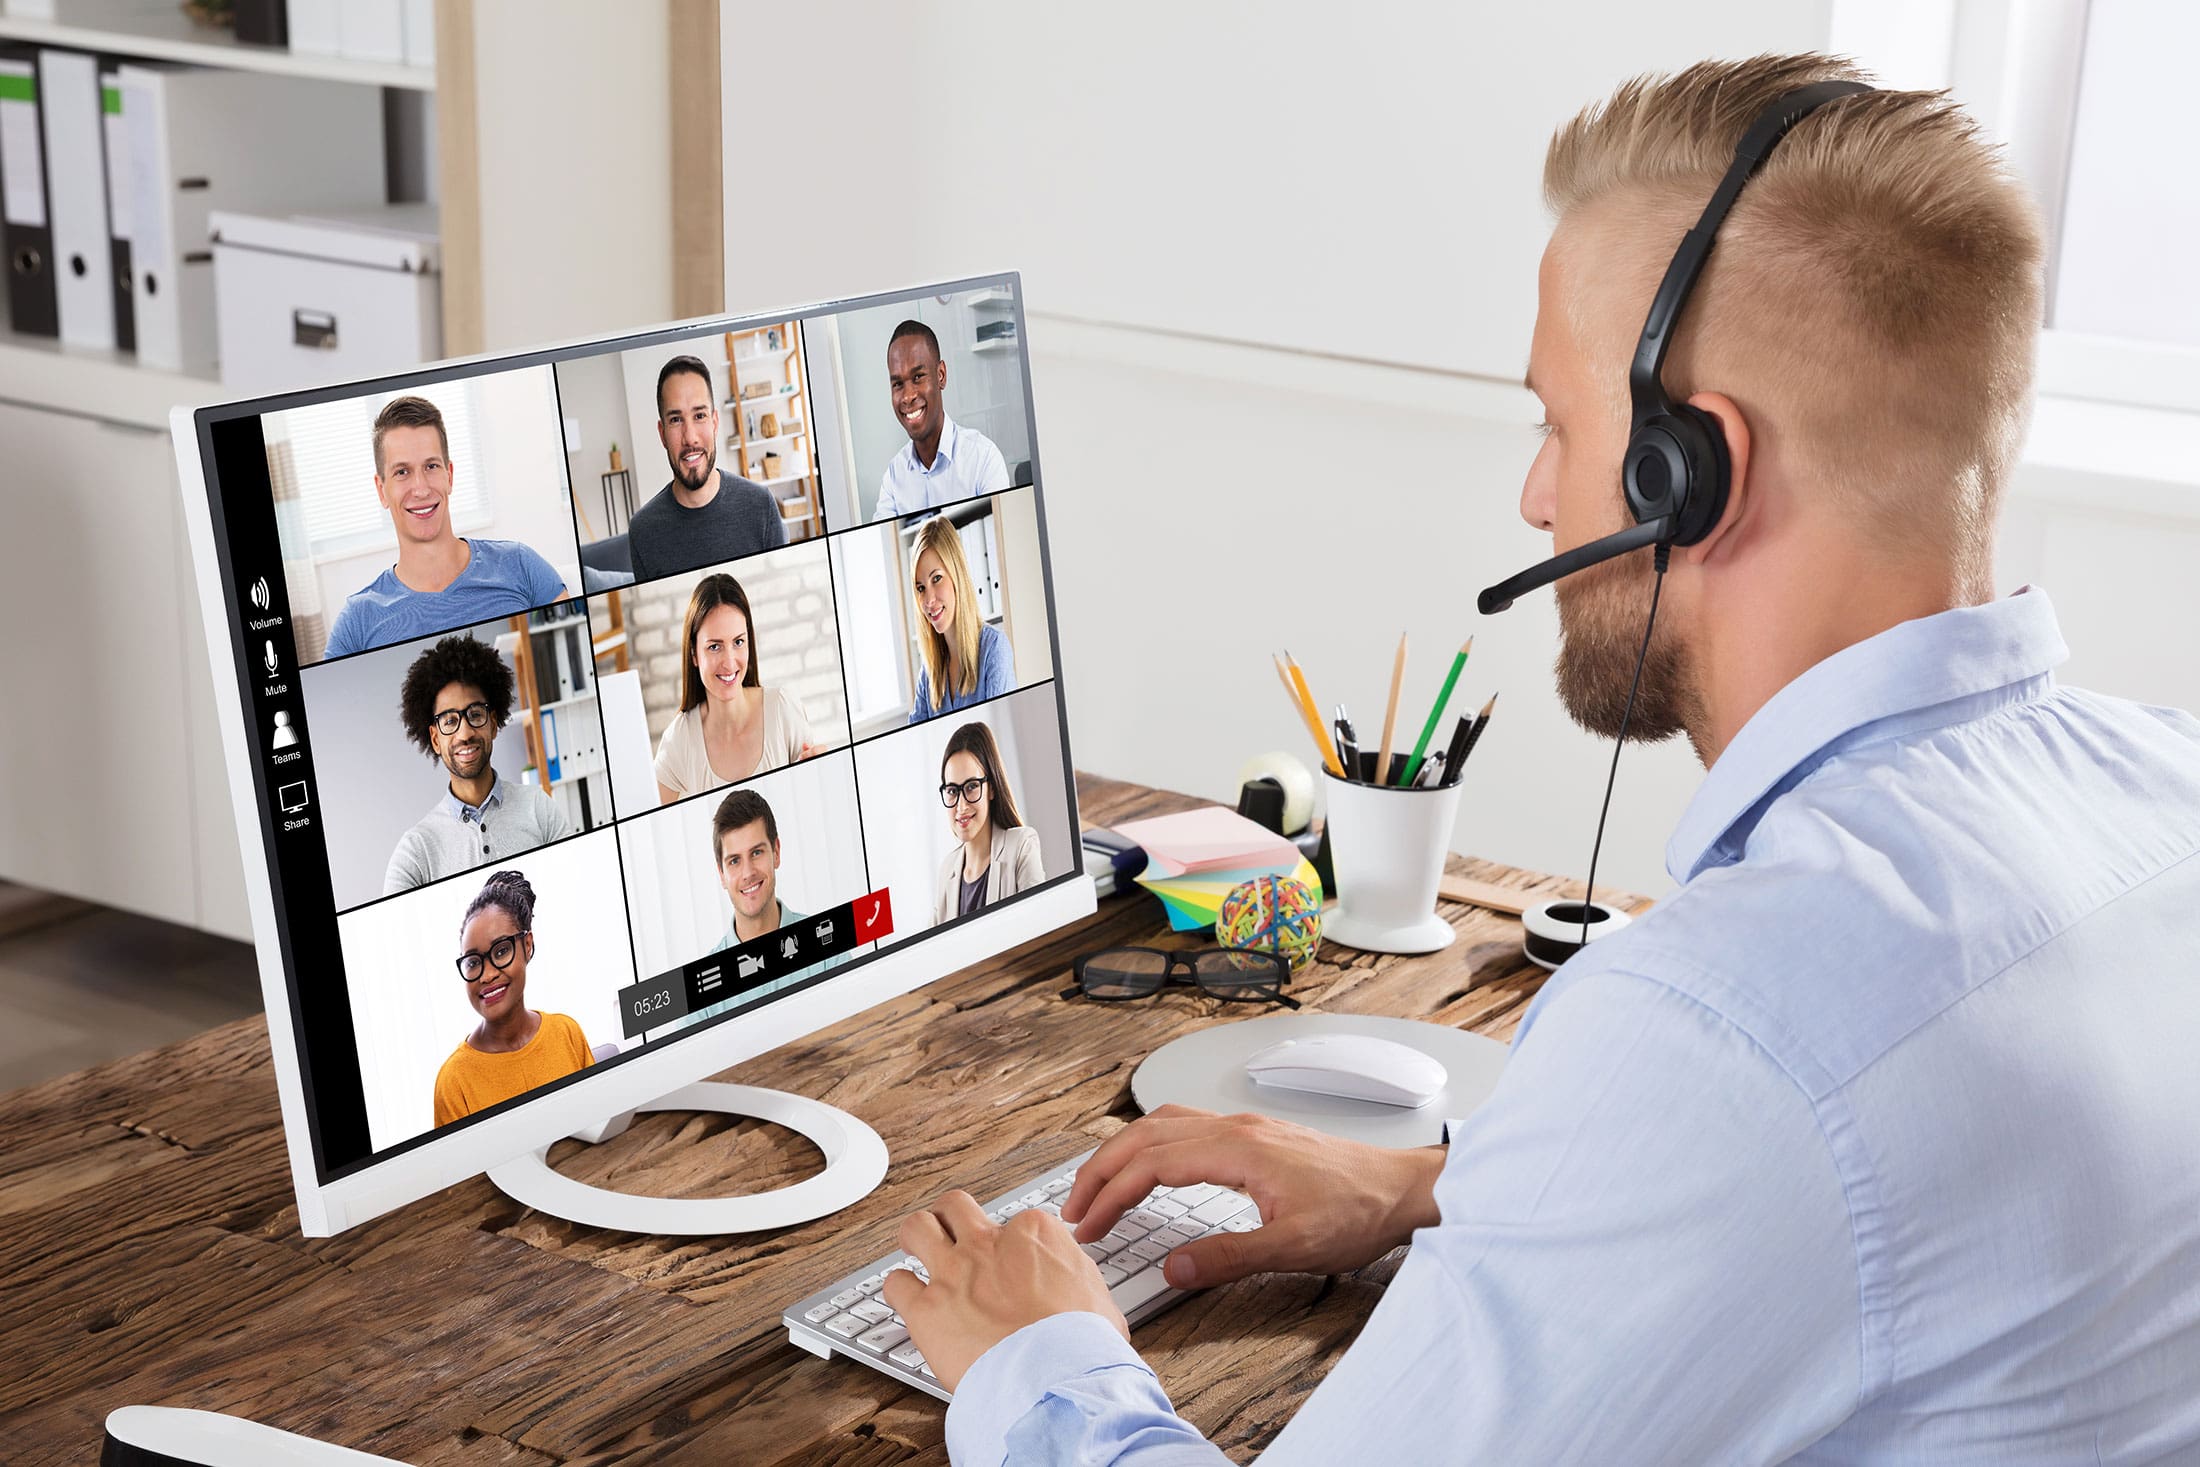 Man with headset on during a remote meeting